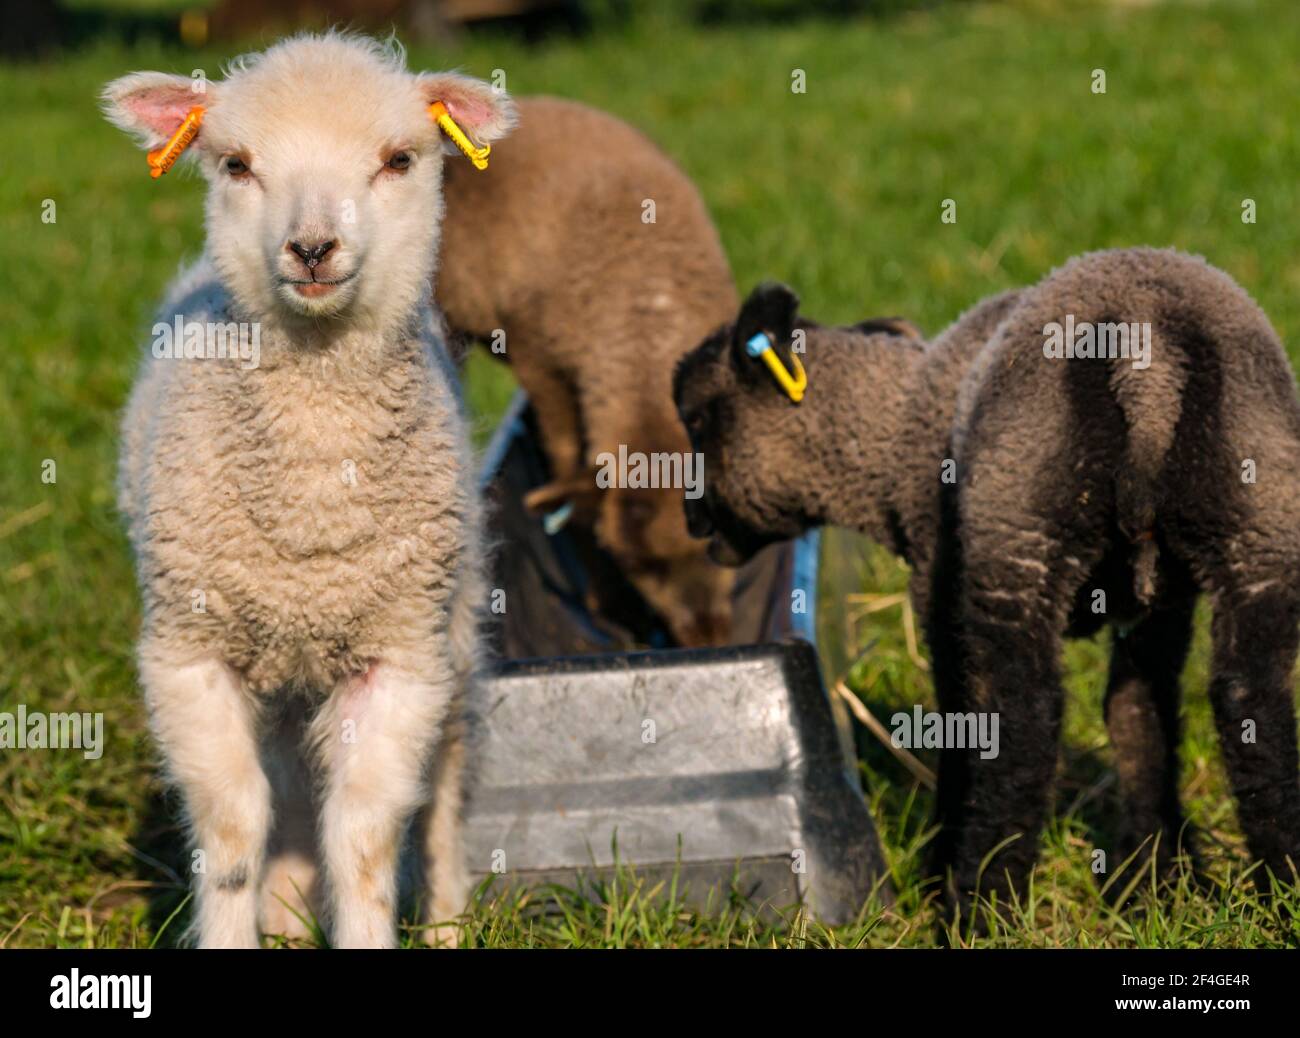 East Lothian, Scotland, United Kingdom, 21st March 2021., UK Weather: Spring lambs in sunshine. Shetland sheep lambs enjoy the Spring sunshine in a grassy green field and their curiosity allows some close ups. A curious cute white female Spring lamb Stock Photo